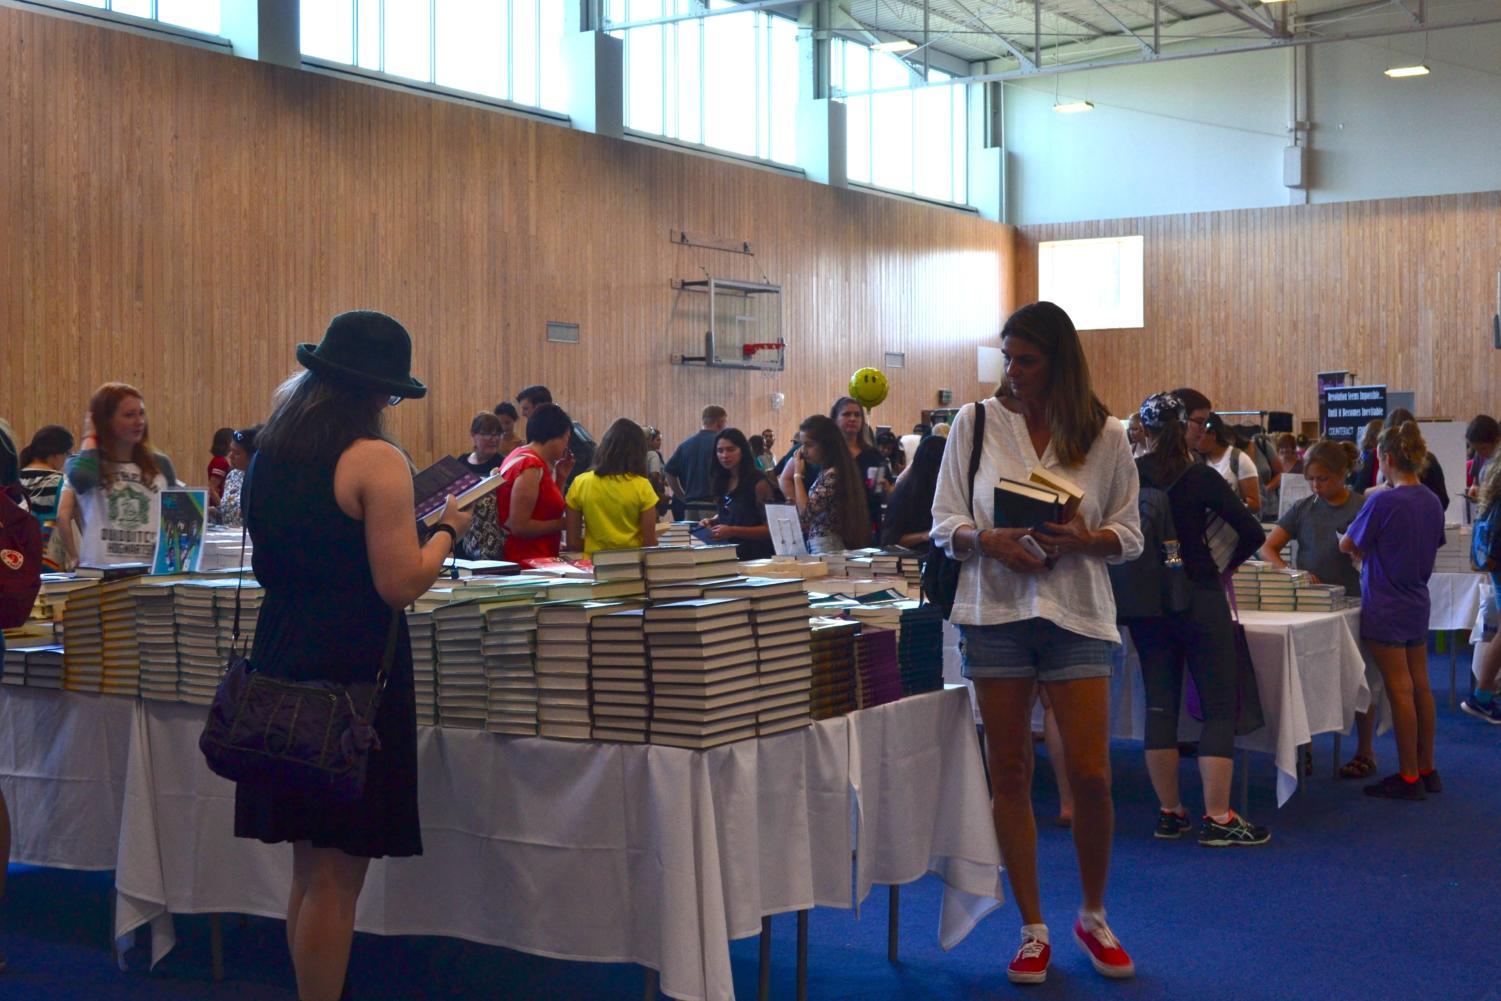 Annual Austin book festival celebrates diversity within the industry